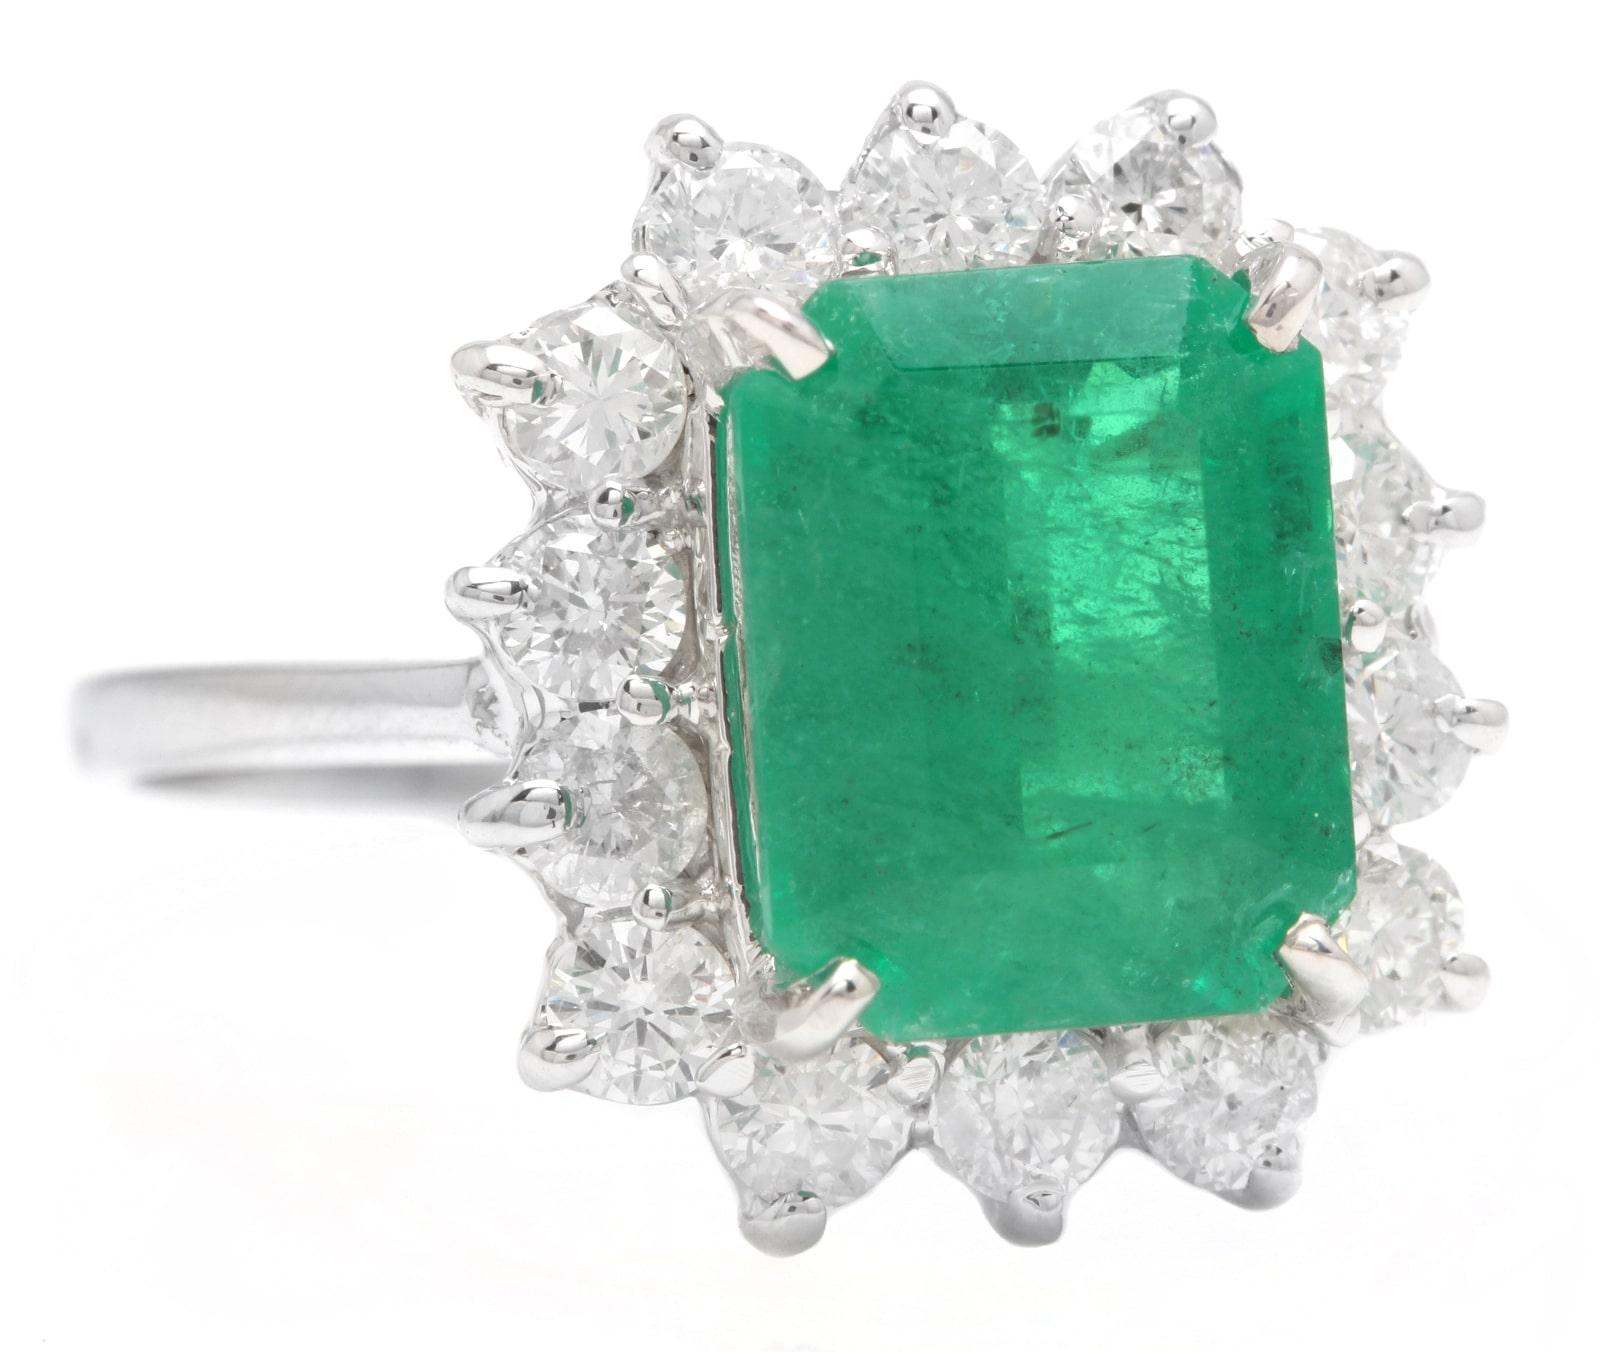 5.15 Carats Natural Emerald and Diamond 14K Solid White Gold Ring

Suggested Replacement Value: Approx. $8,000.00

Total Natural Green Emerald Weight is: Approx. 4.00 Carats

Emerald Measures: Approx. 11 x 8 mm

Natural Round Diamonds Weight: